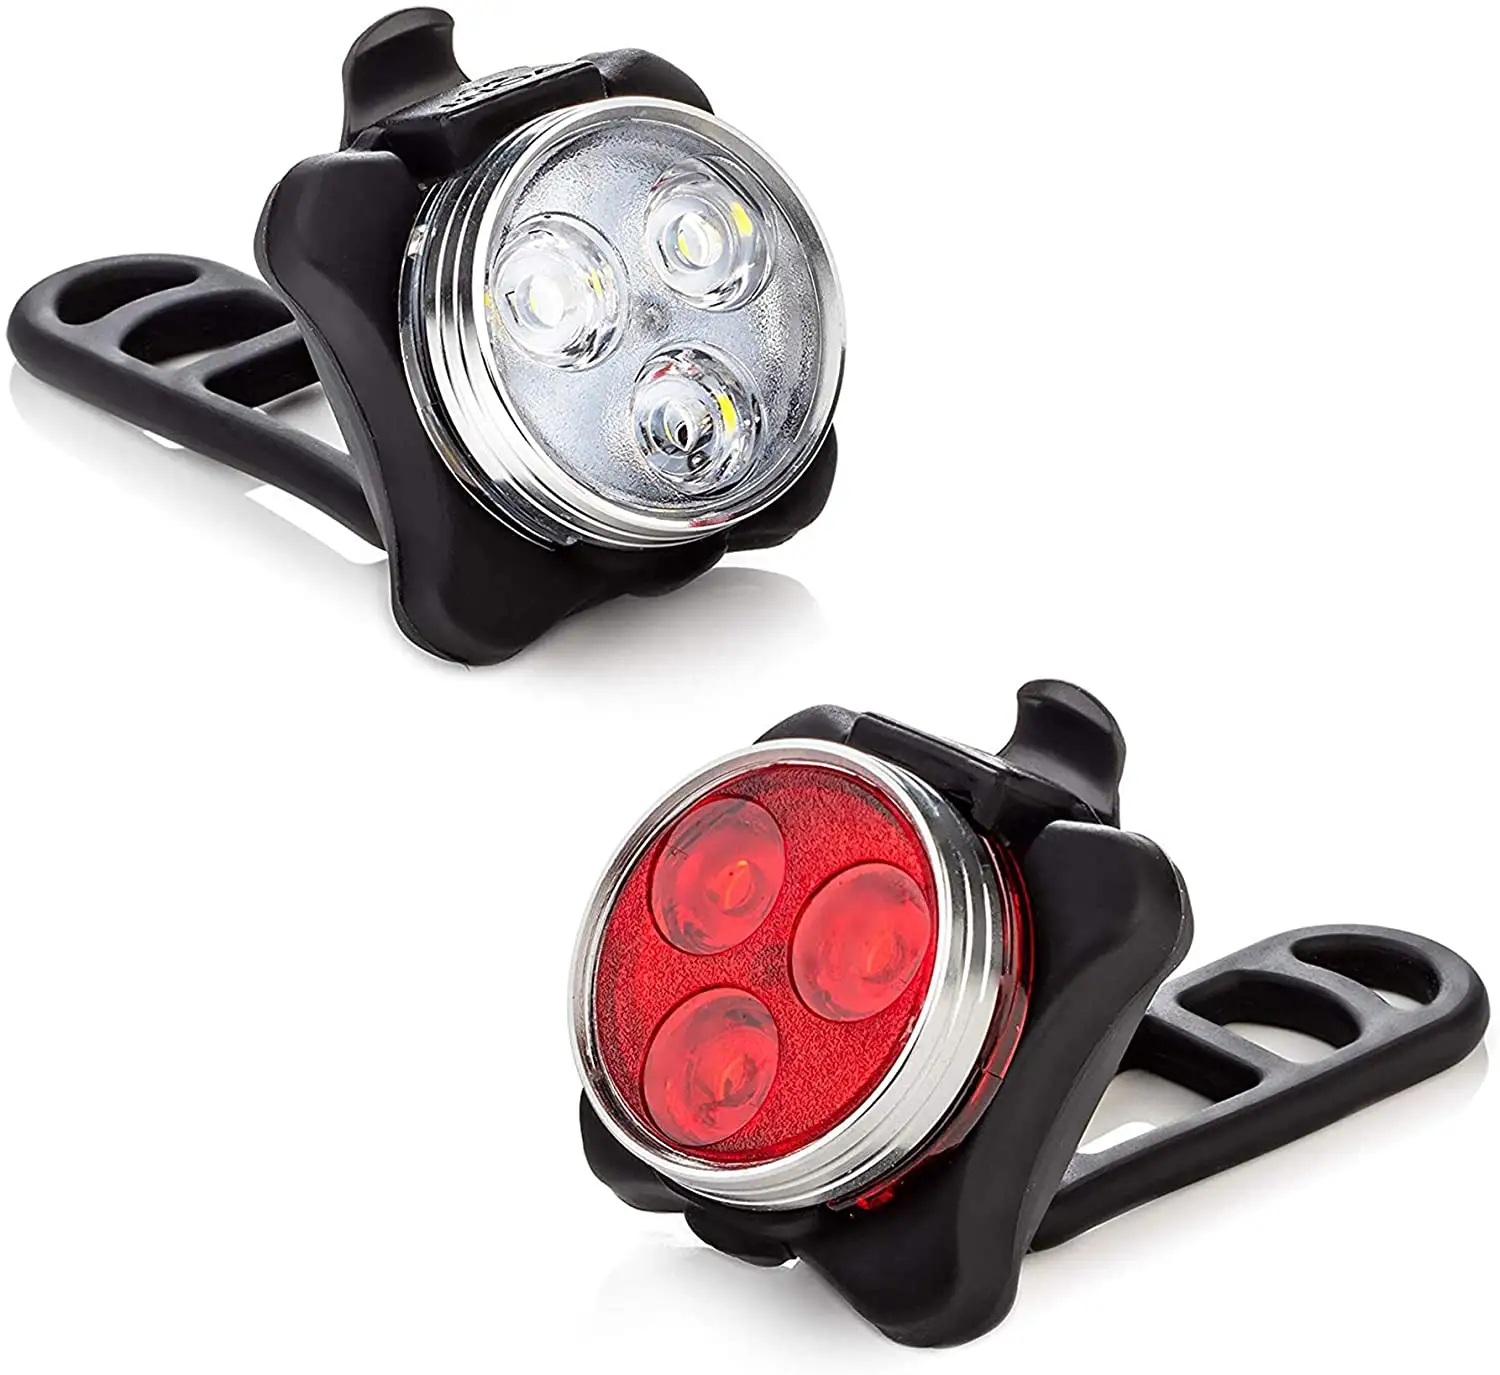 USB Rechargeable Super Bright Bicycle Light Bike Lights Front and Back Bike Headlight Longer Battery Life Waterproof